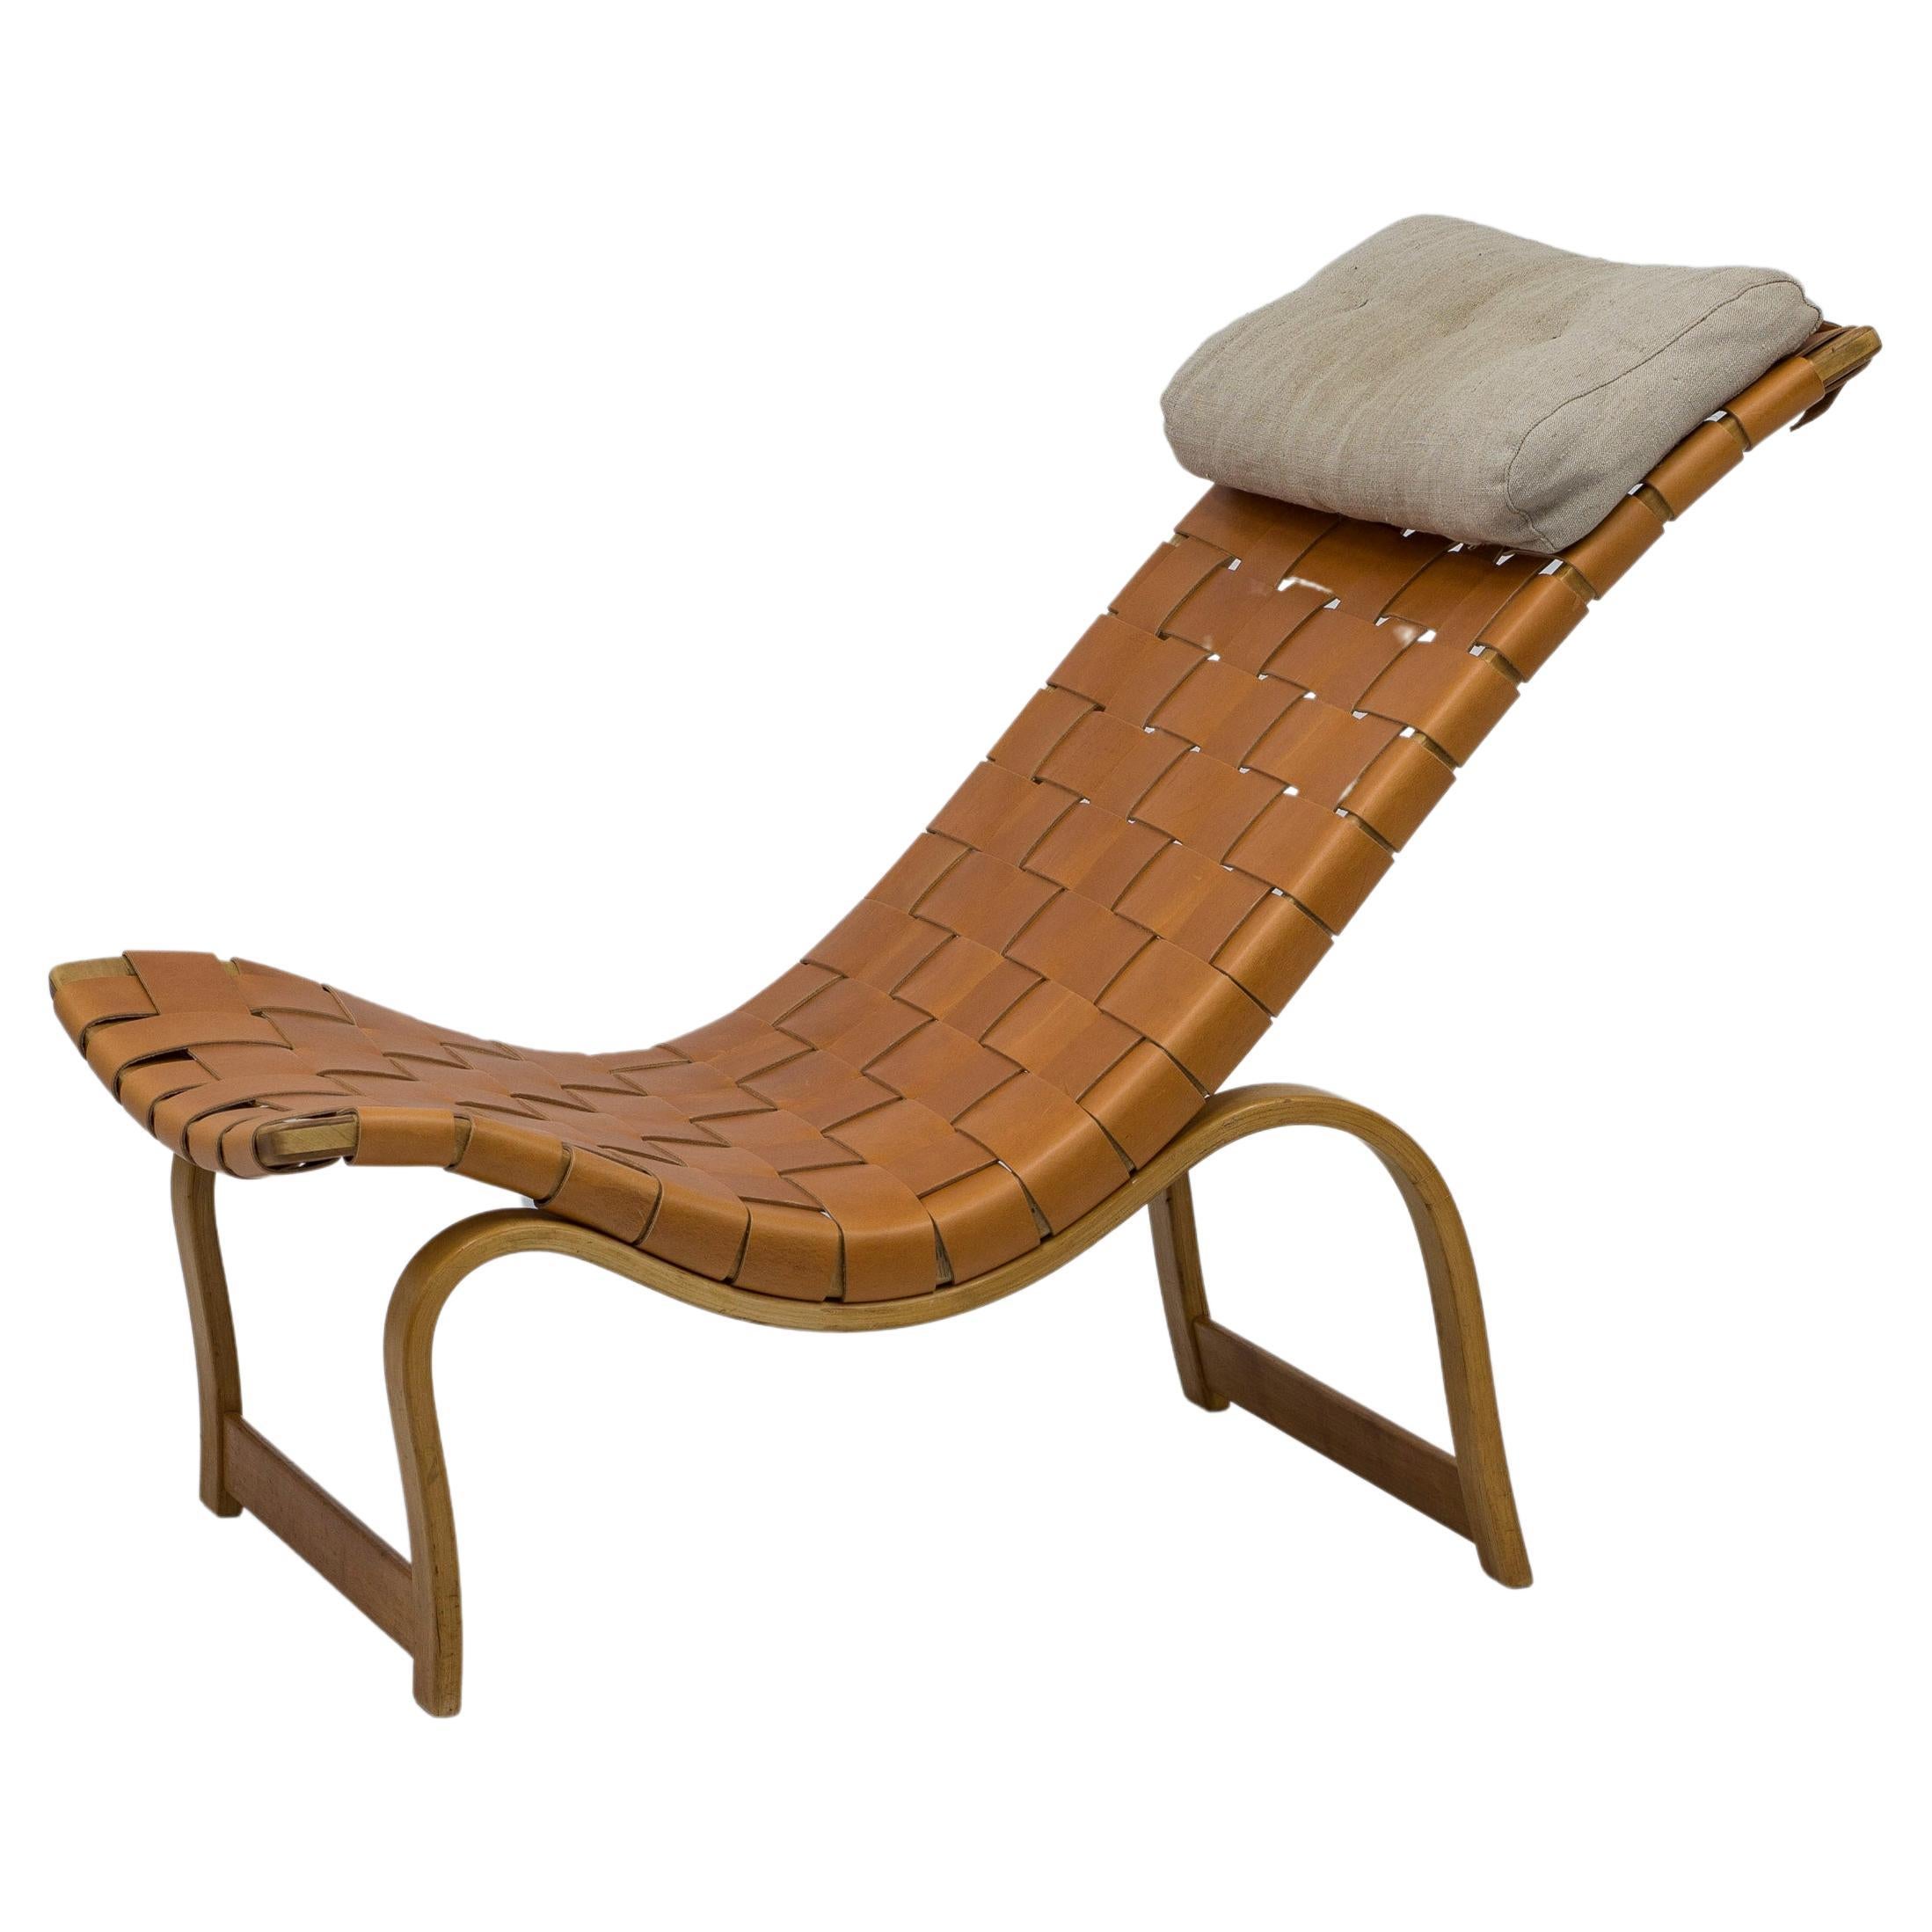 Early model 36 chaise longue by Bruno Mathsson, Leather and beech, 1940s